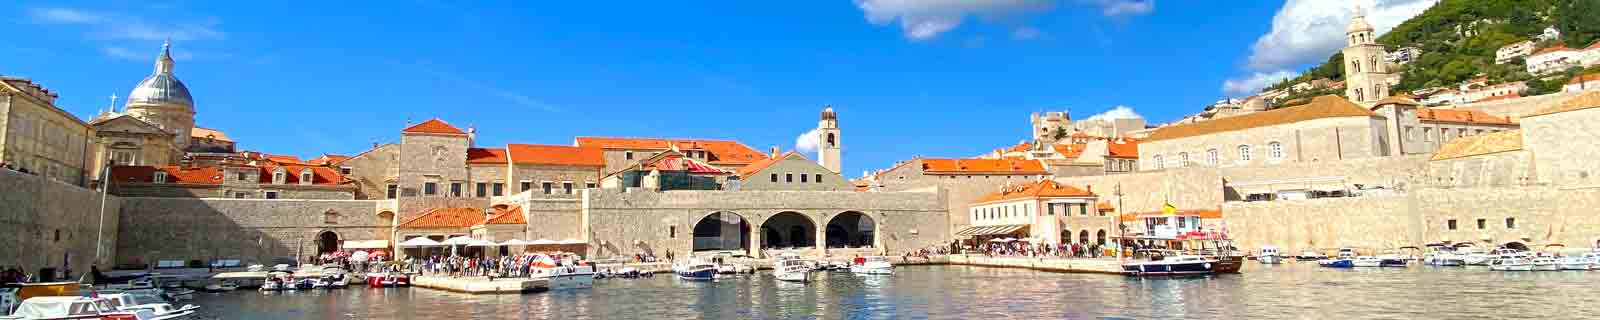 Panoramic photo of the old port in Dubrovnik, Croatia, cruise port